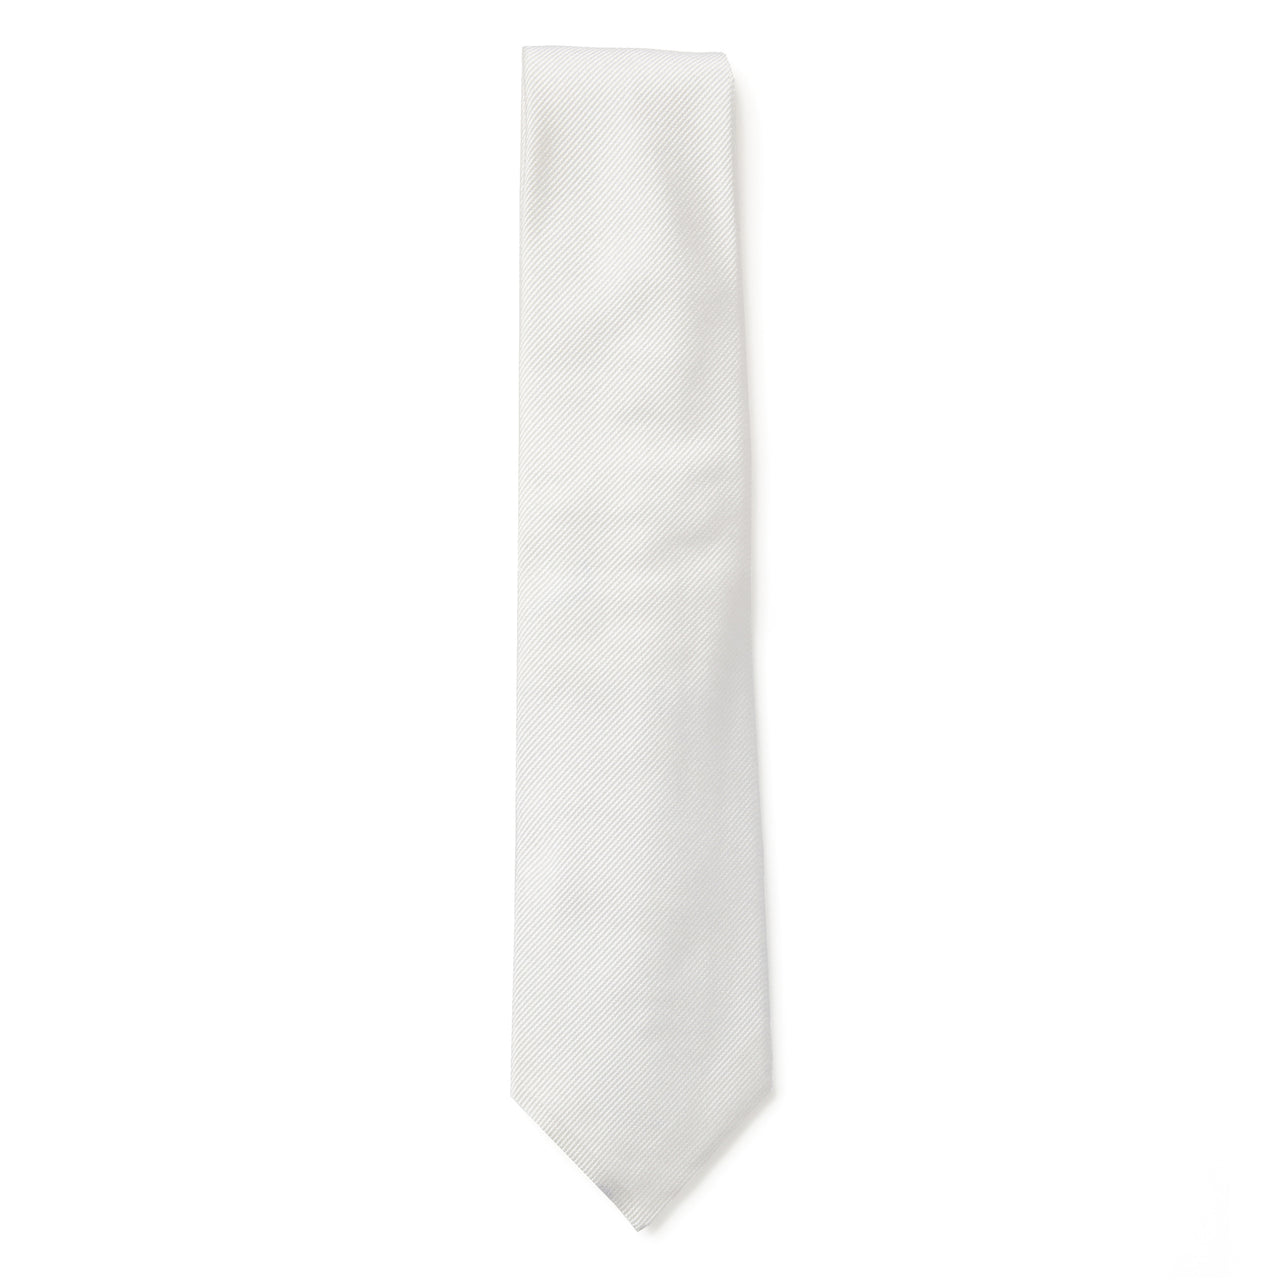 HENRY SARTORIAL 3 Fold Zeus Collection Tie WHITE